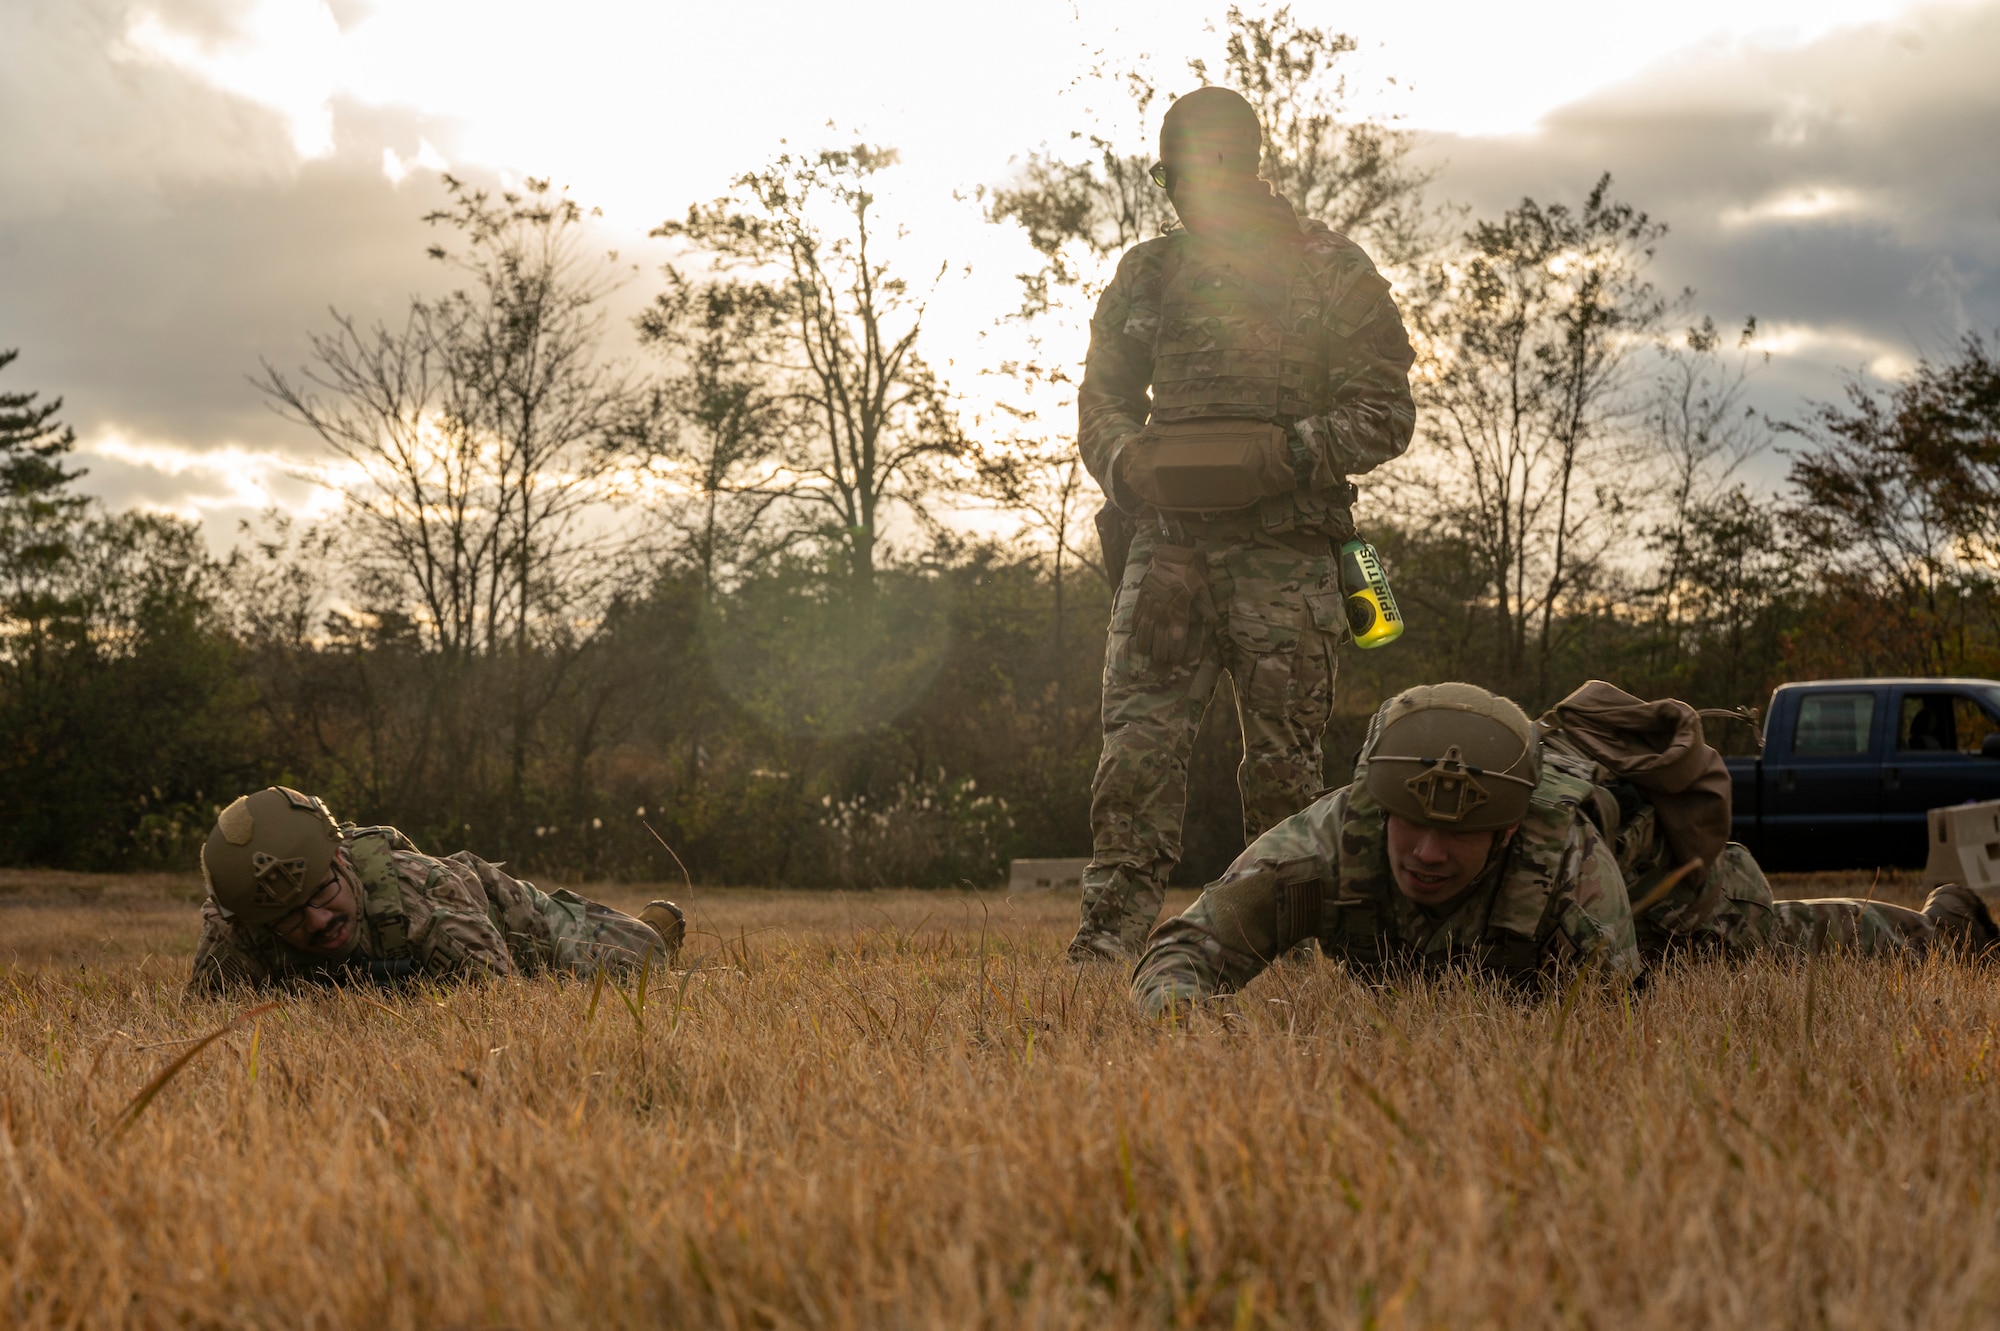 Airmen perform low crawl during a training exercise.